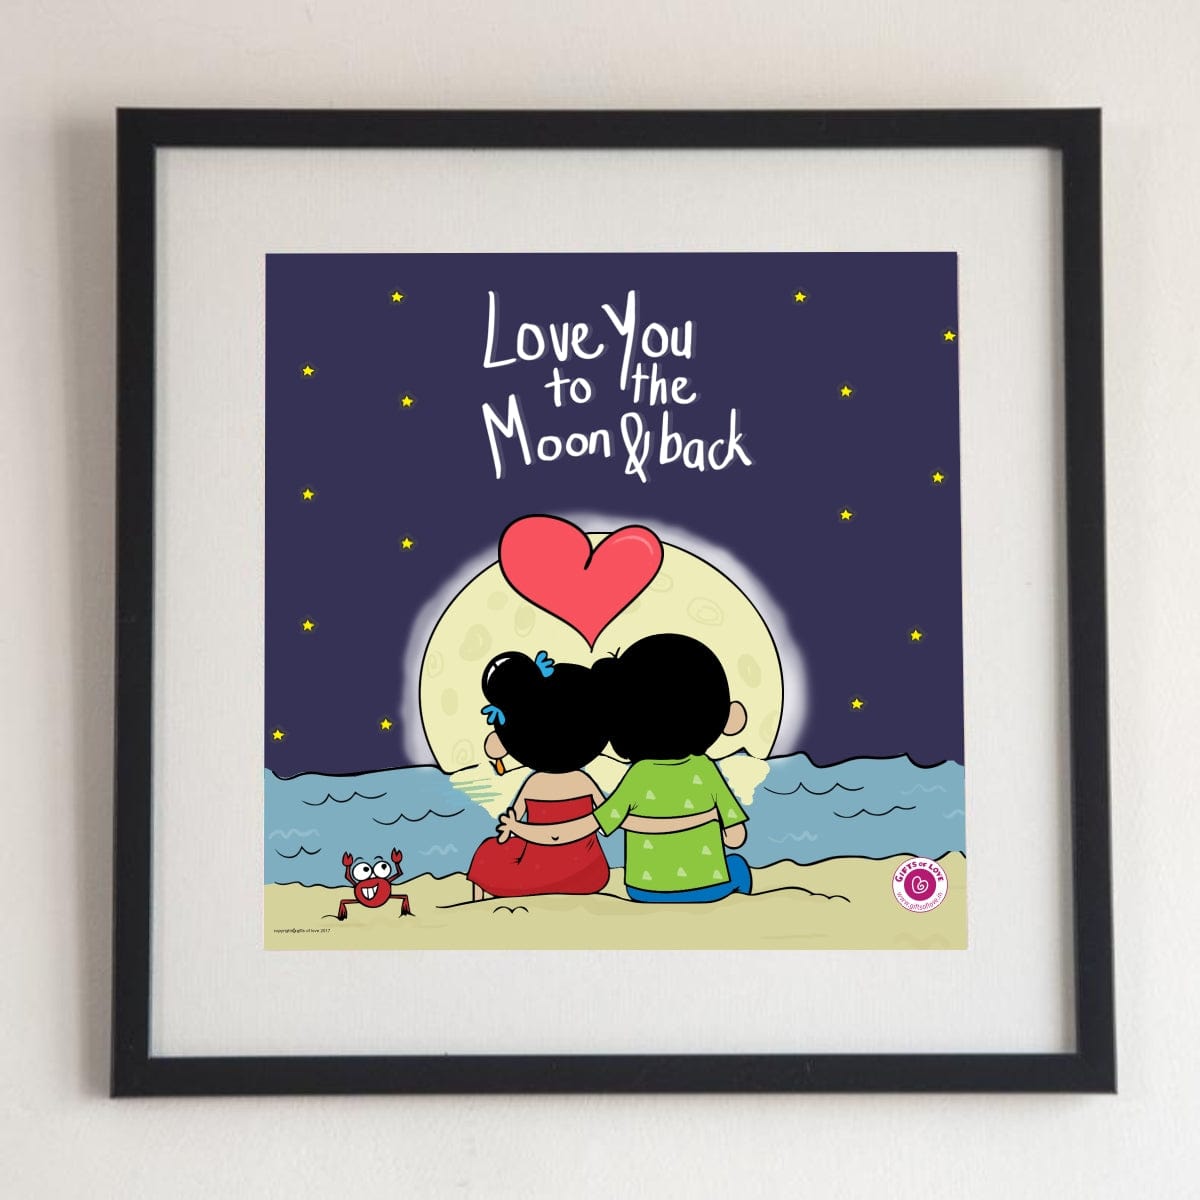 Gifts of Love Wall Art Ahava Love You to the Moon and Back